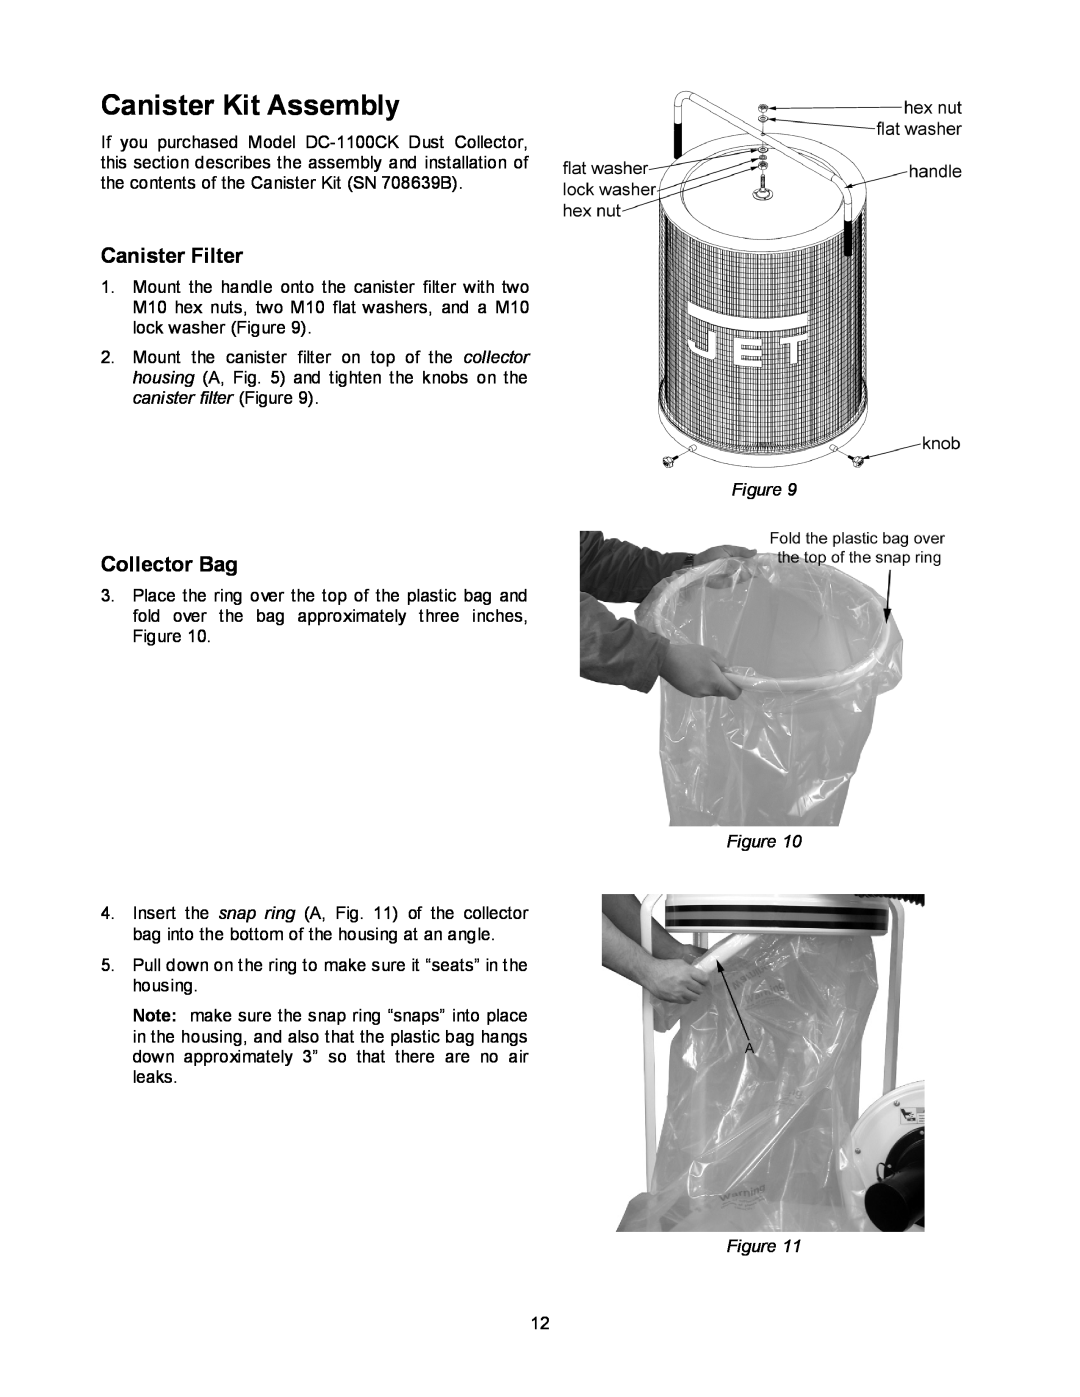 Jet Tools DC-1100CK operating instructions Canister Kit Assembly, Canister Filter, Collector Bag 